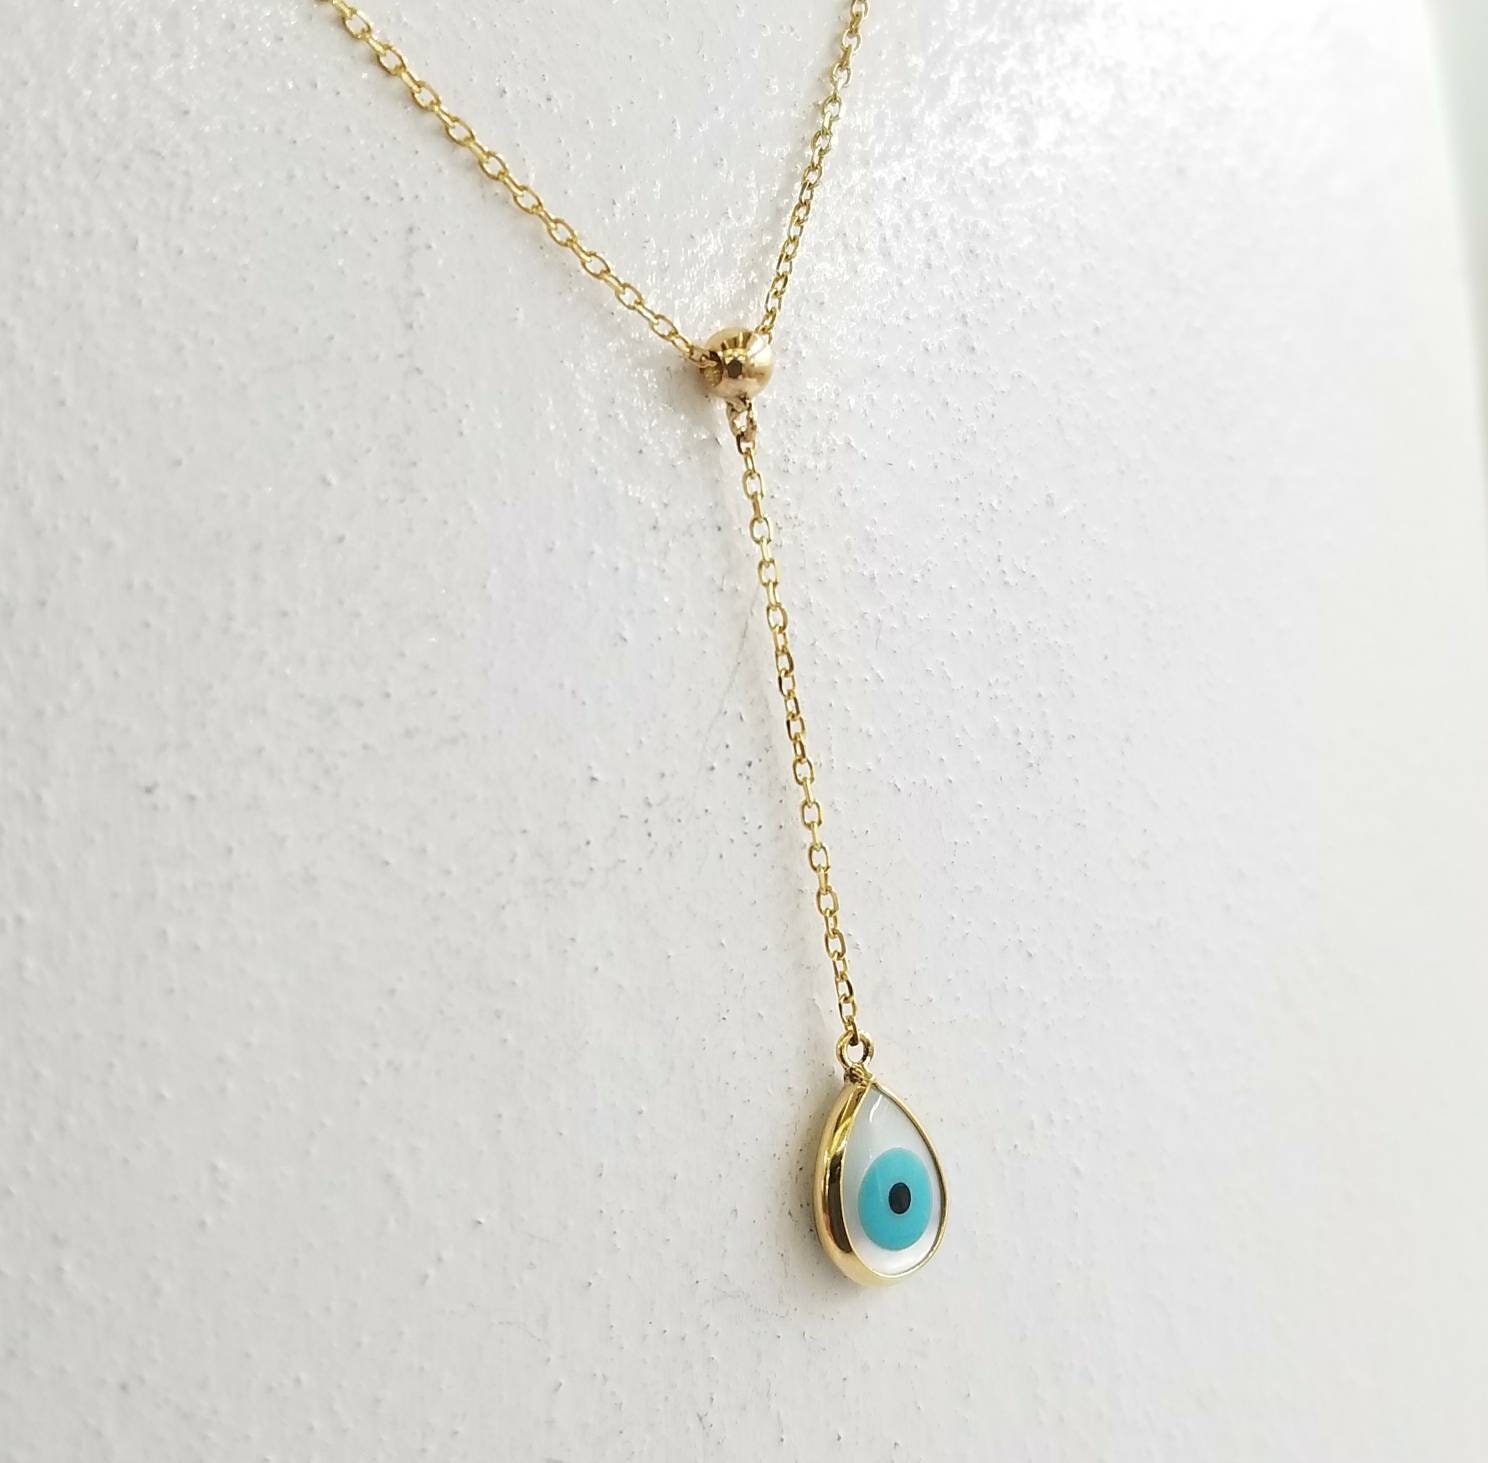 Evil eye lariat necklace in k14 solid gold with mother of | Etsy